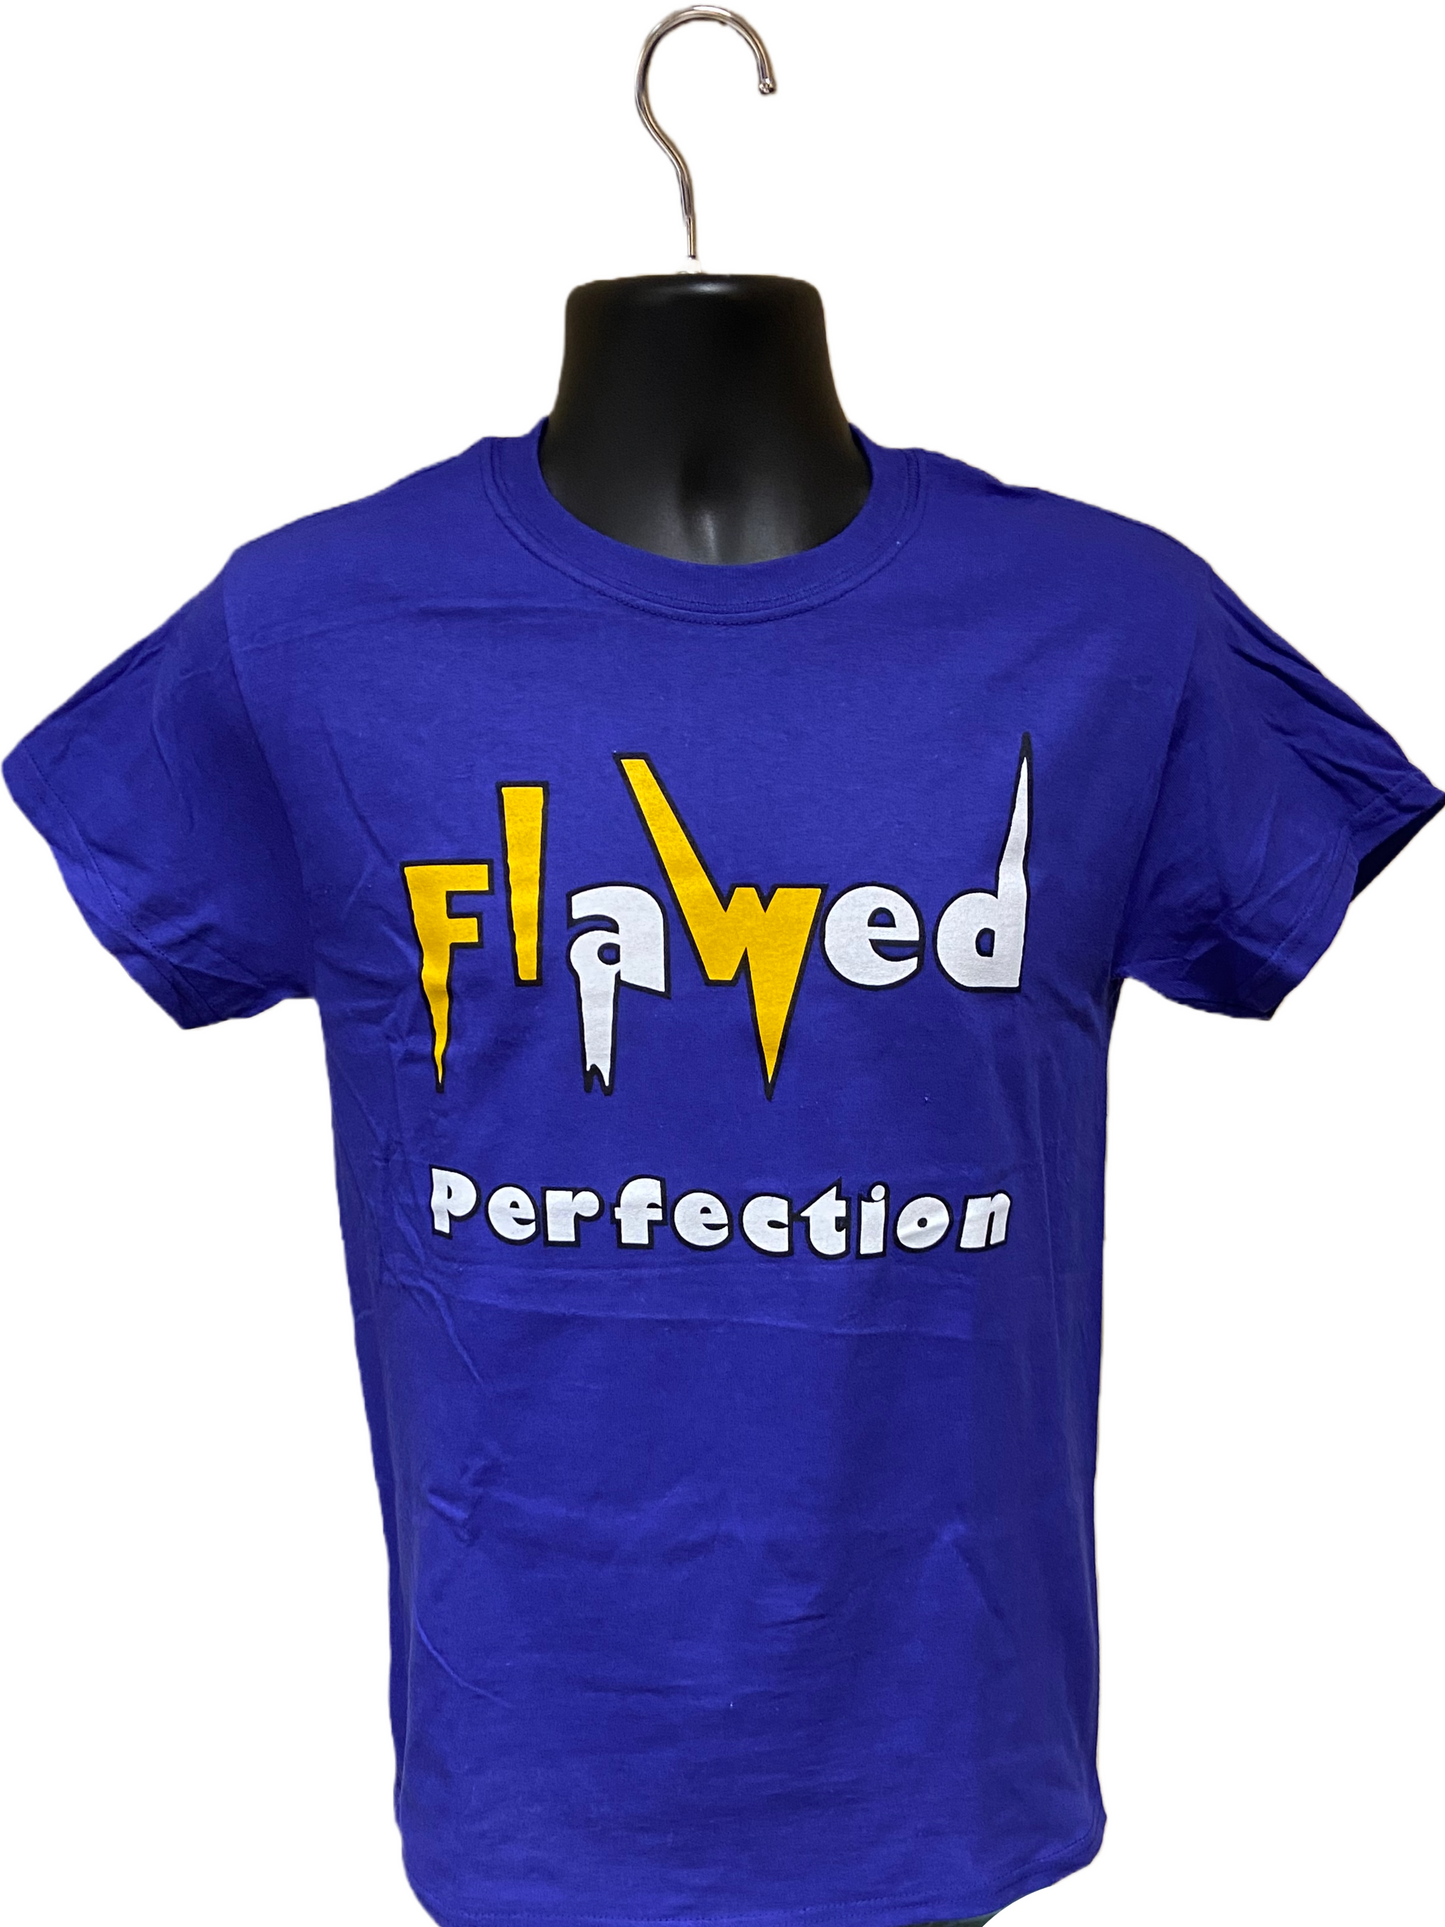 Flawed Perfection - Classic Design